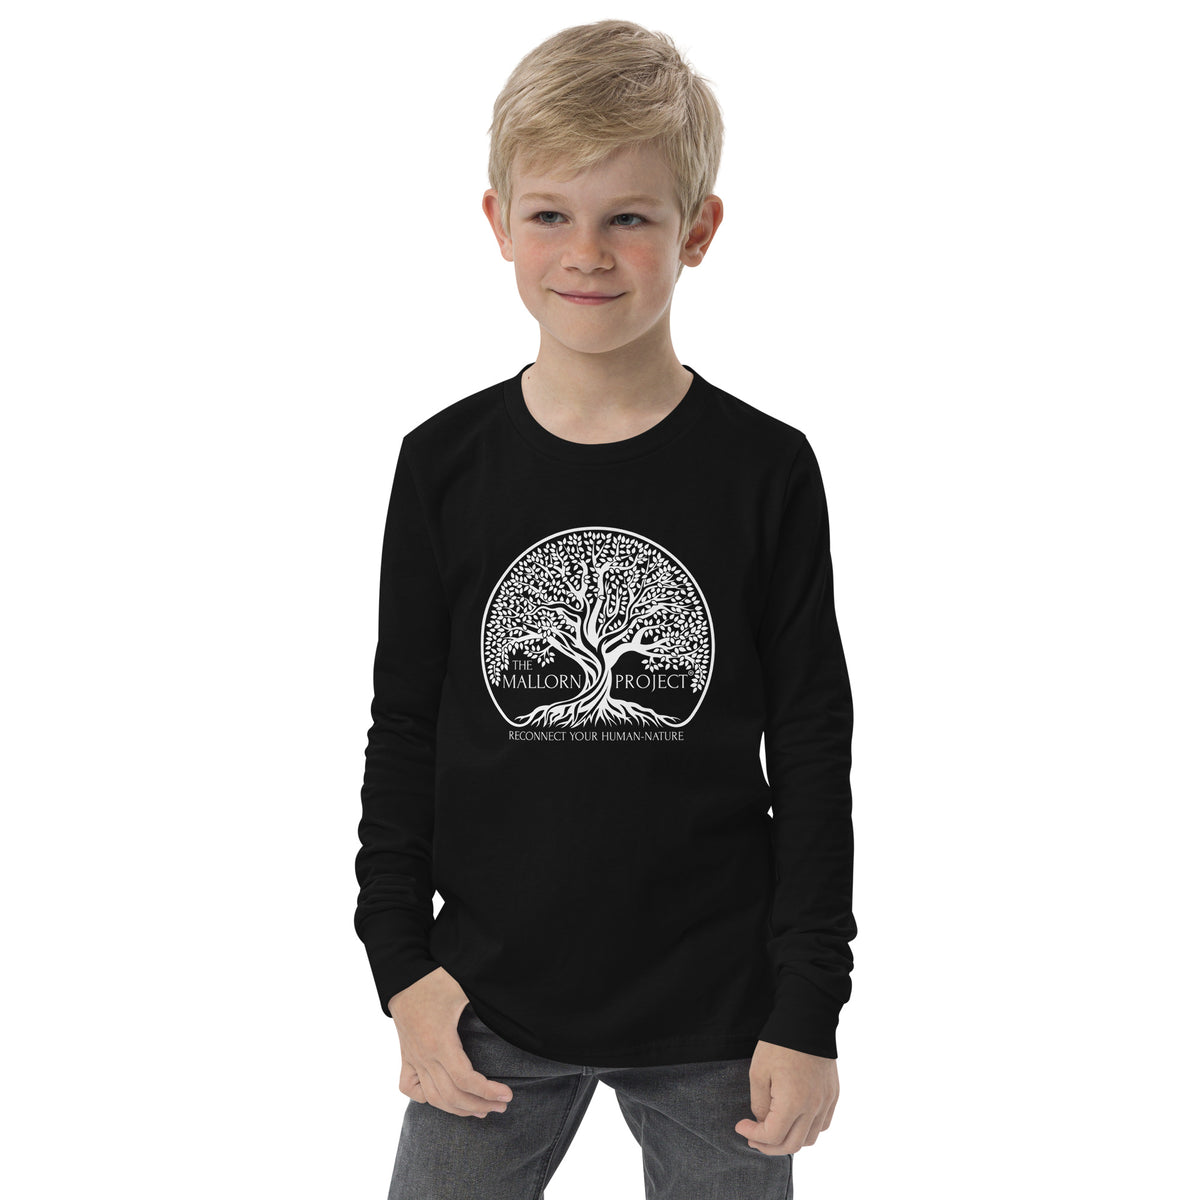 The Mallorn Project® Black/White Logo Unisex Silver Star Long-Sleeve - Youth